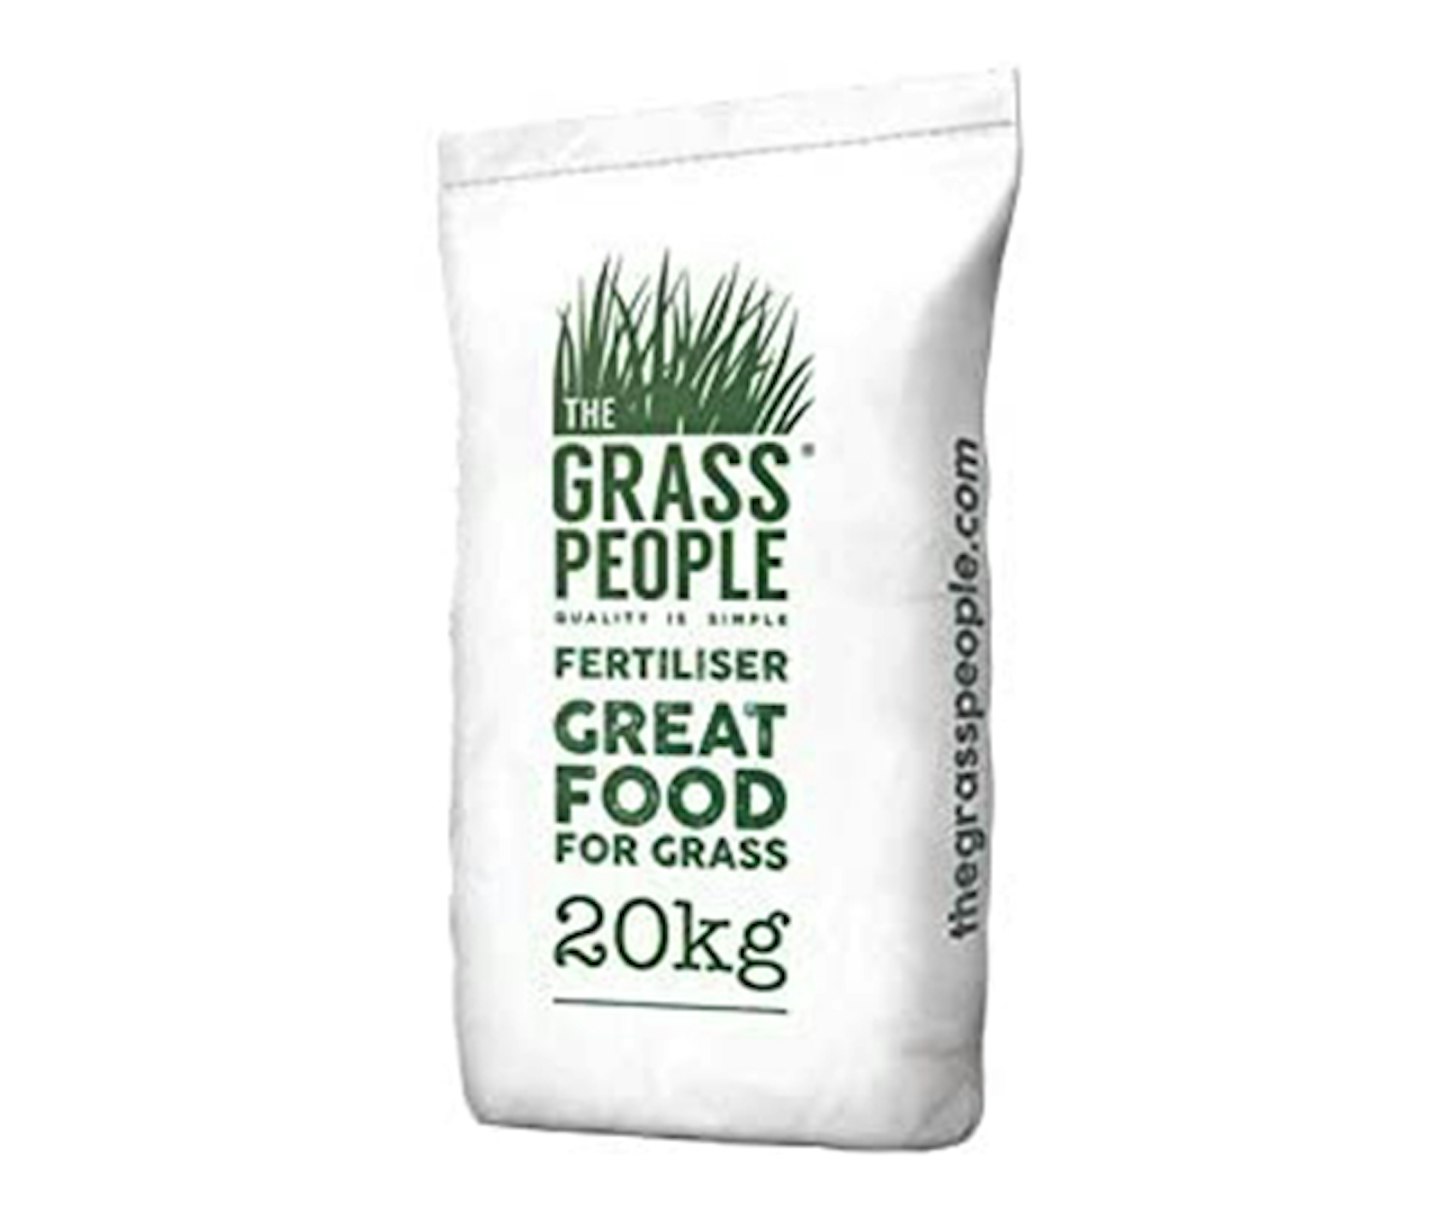 The Grass People Quick Release: Pre-Seed Fertiliser